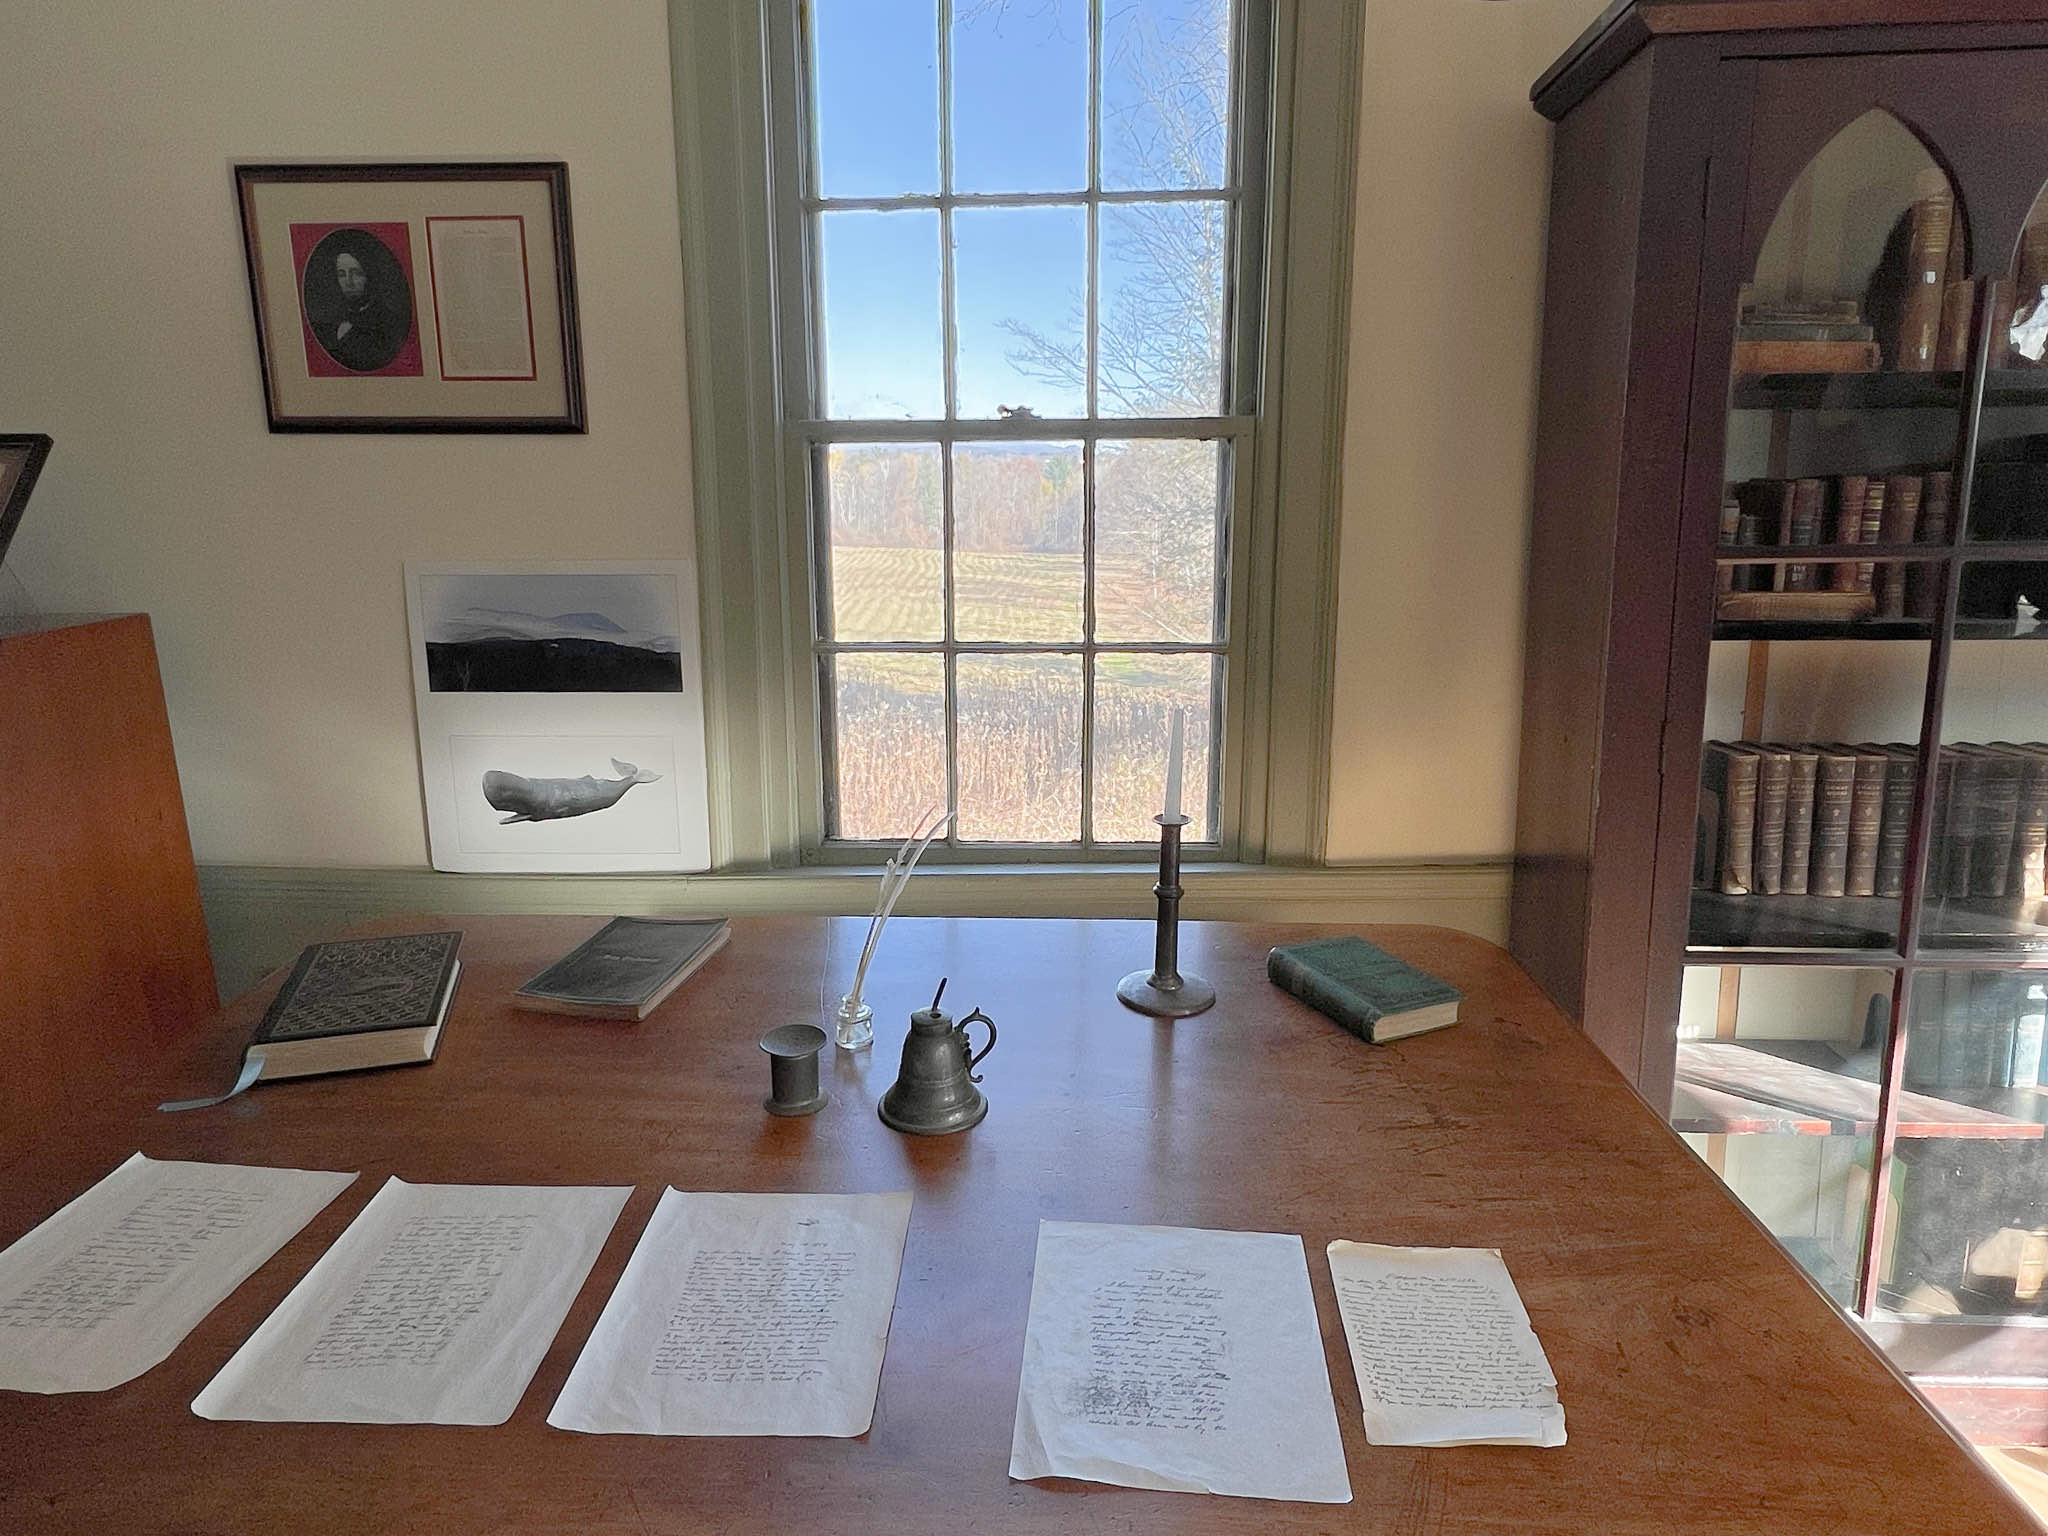 the-desk-where-herman-melville-wrote-moby-dick-arrowhead-pittsfield-massachusetts